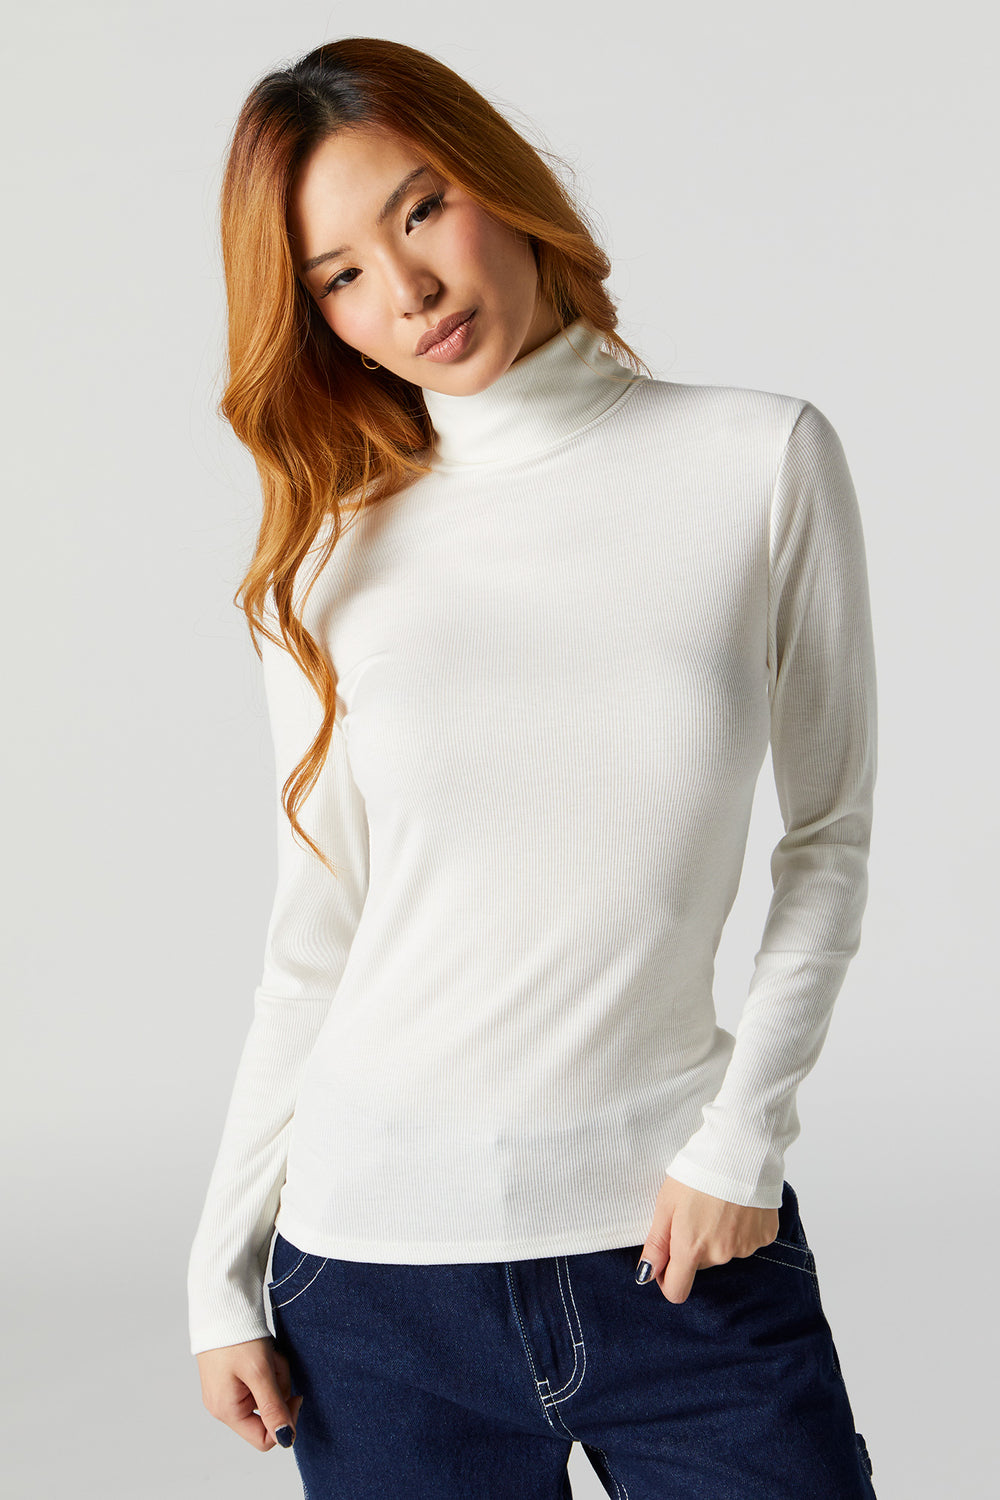 Ribbed Turtleneck Long Sleeve Top Ribbed Turtleneck Long Sleeve Top 11